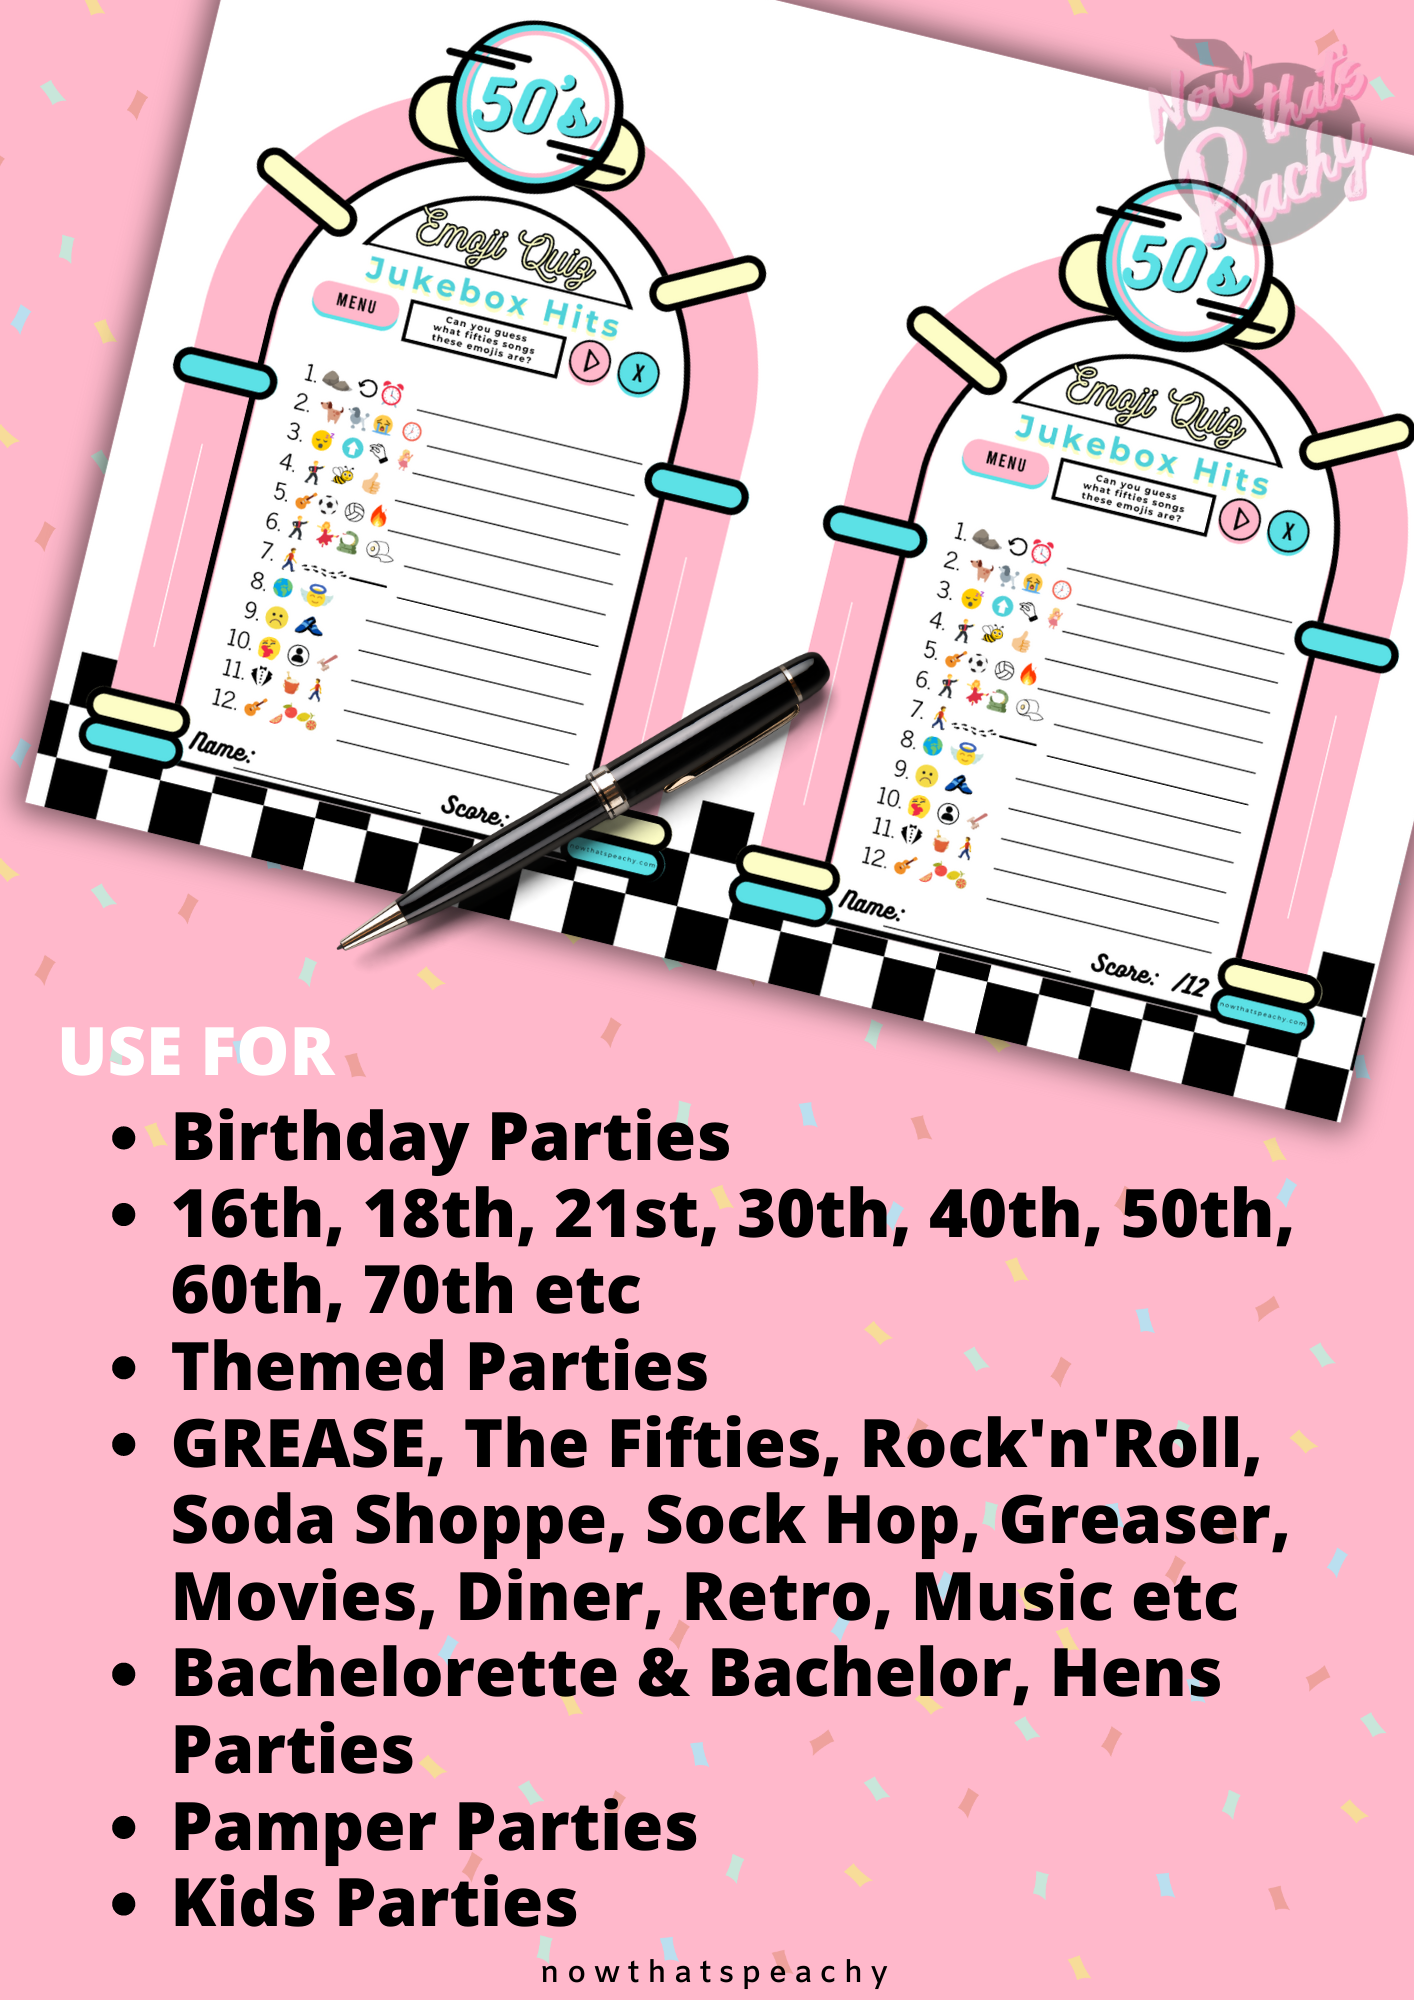 Emoji DINER 1950's Music Song Guessing Game Party PRINTABLE, Rock'n'roll Sock Hop Retro 50s Birthday fifties Soda hop instant digital download quiz birthday kids teen adult all ages print off at home fun easy cheap Jukebox hits games